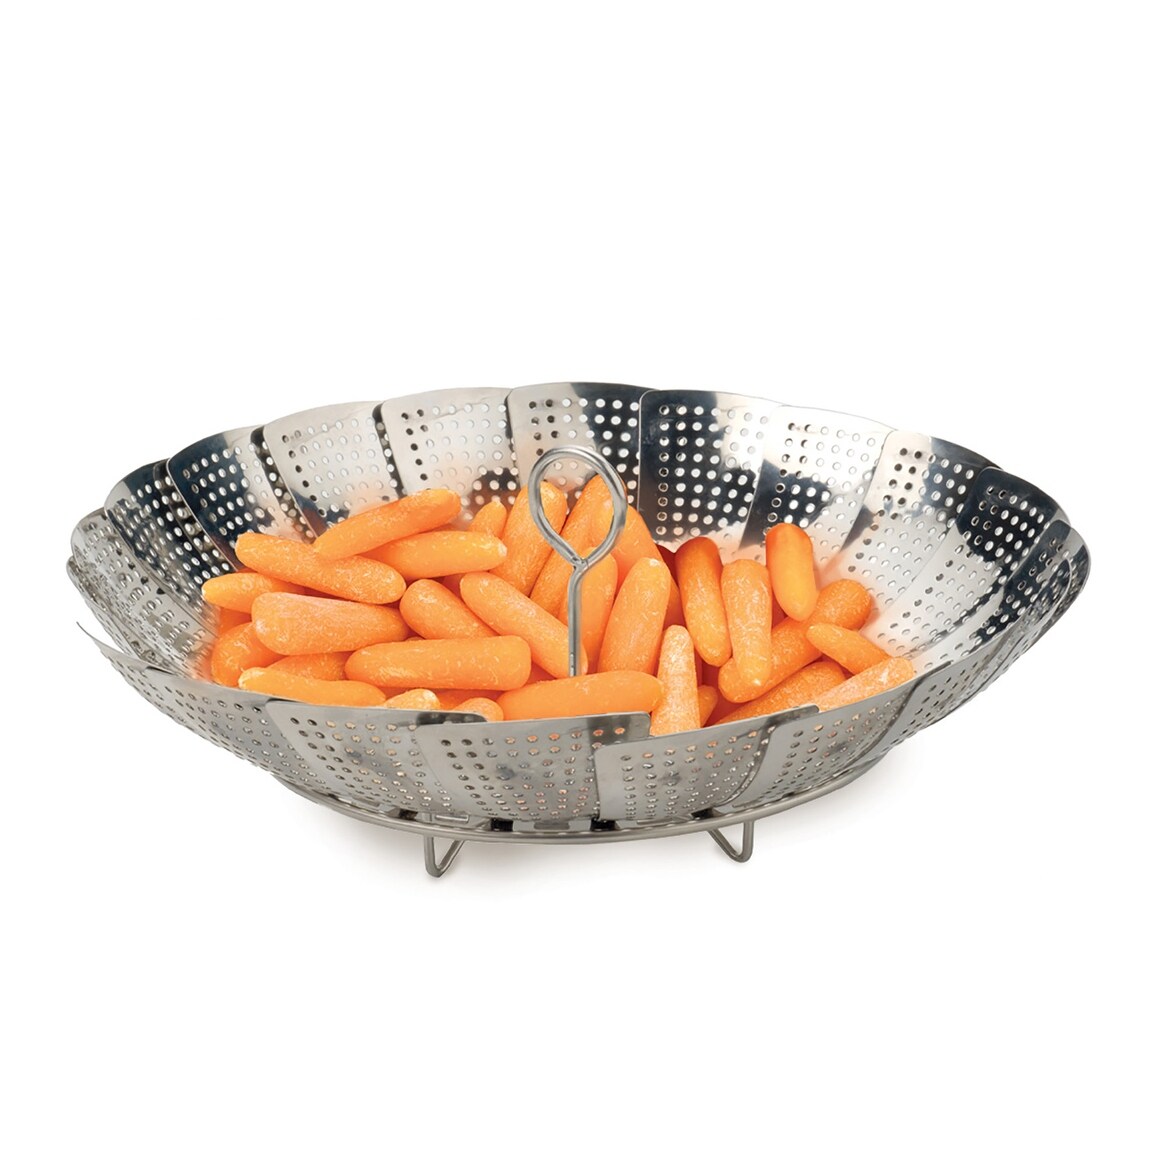 https://ak1.ostkcdn.com/images/products/is/images/direct/2ab67d2e047ab8e5034355a807bbb9b3897a81a2/Vegetable-Steamer.jpg